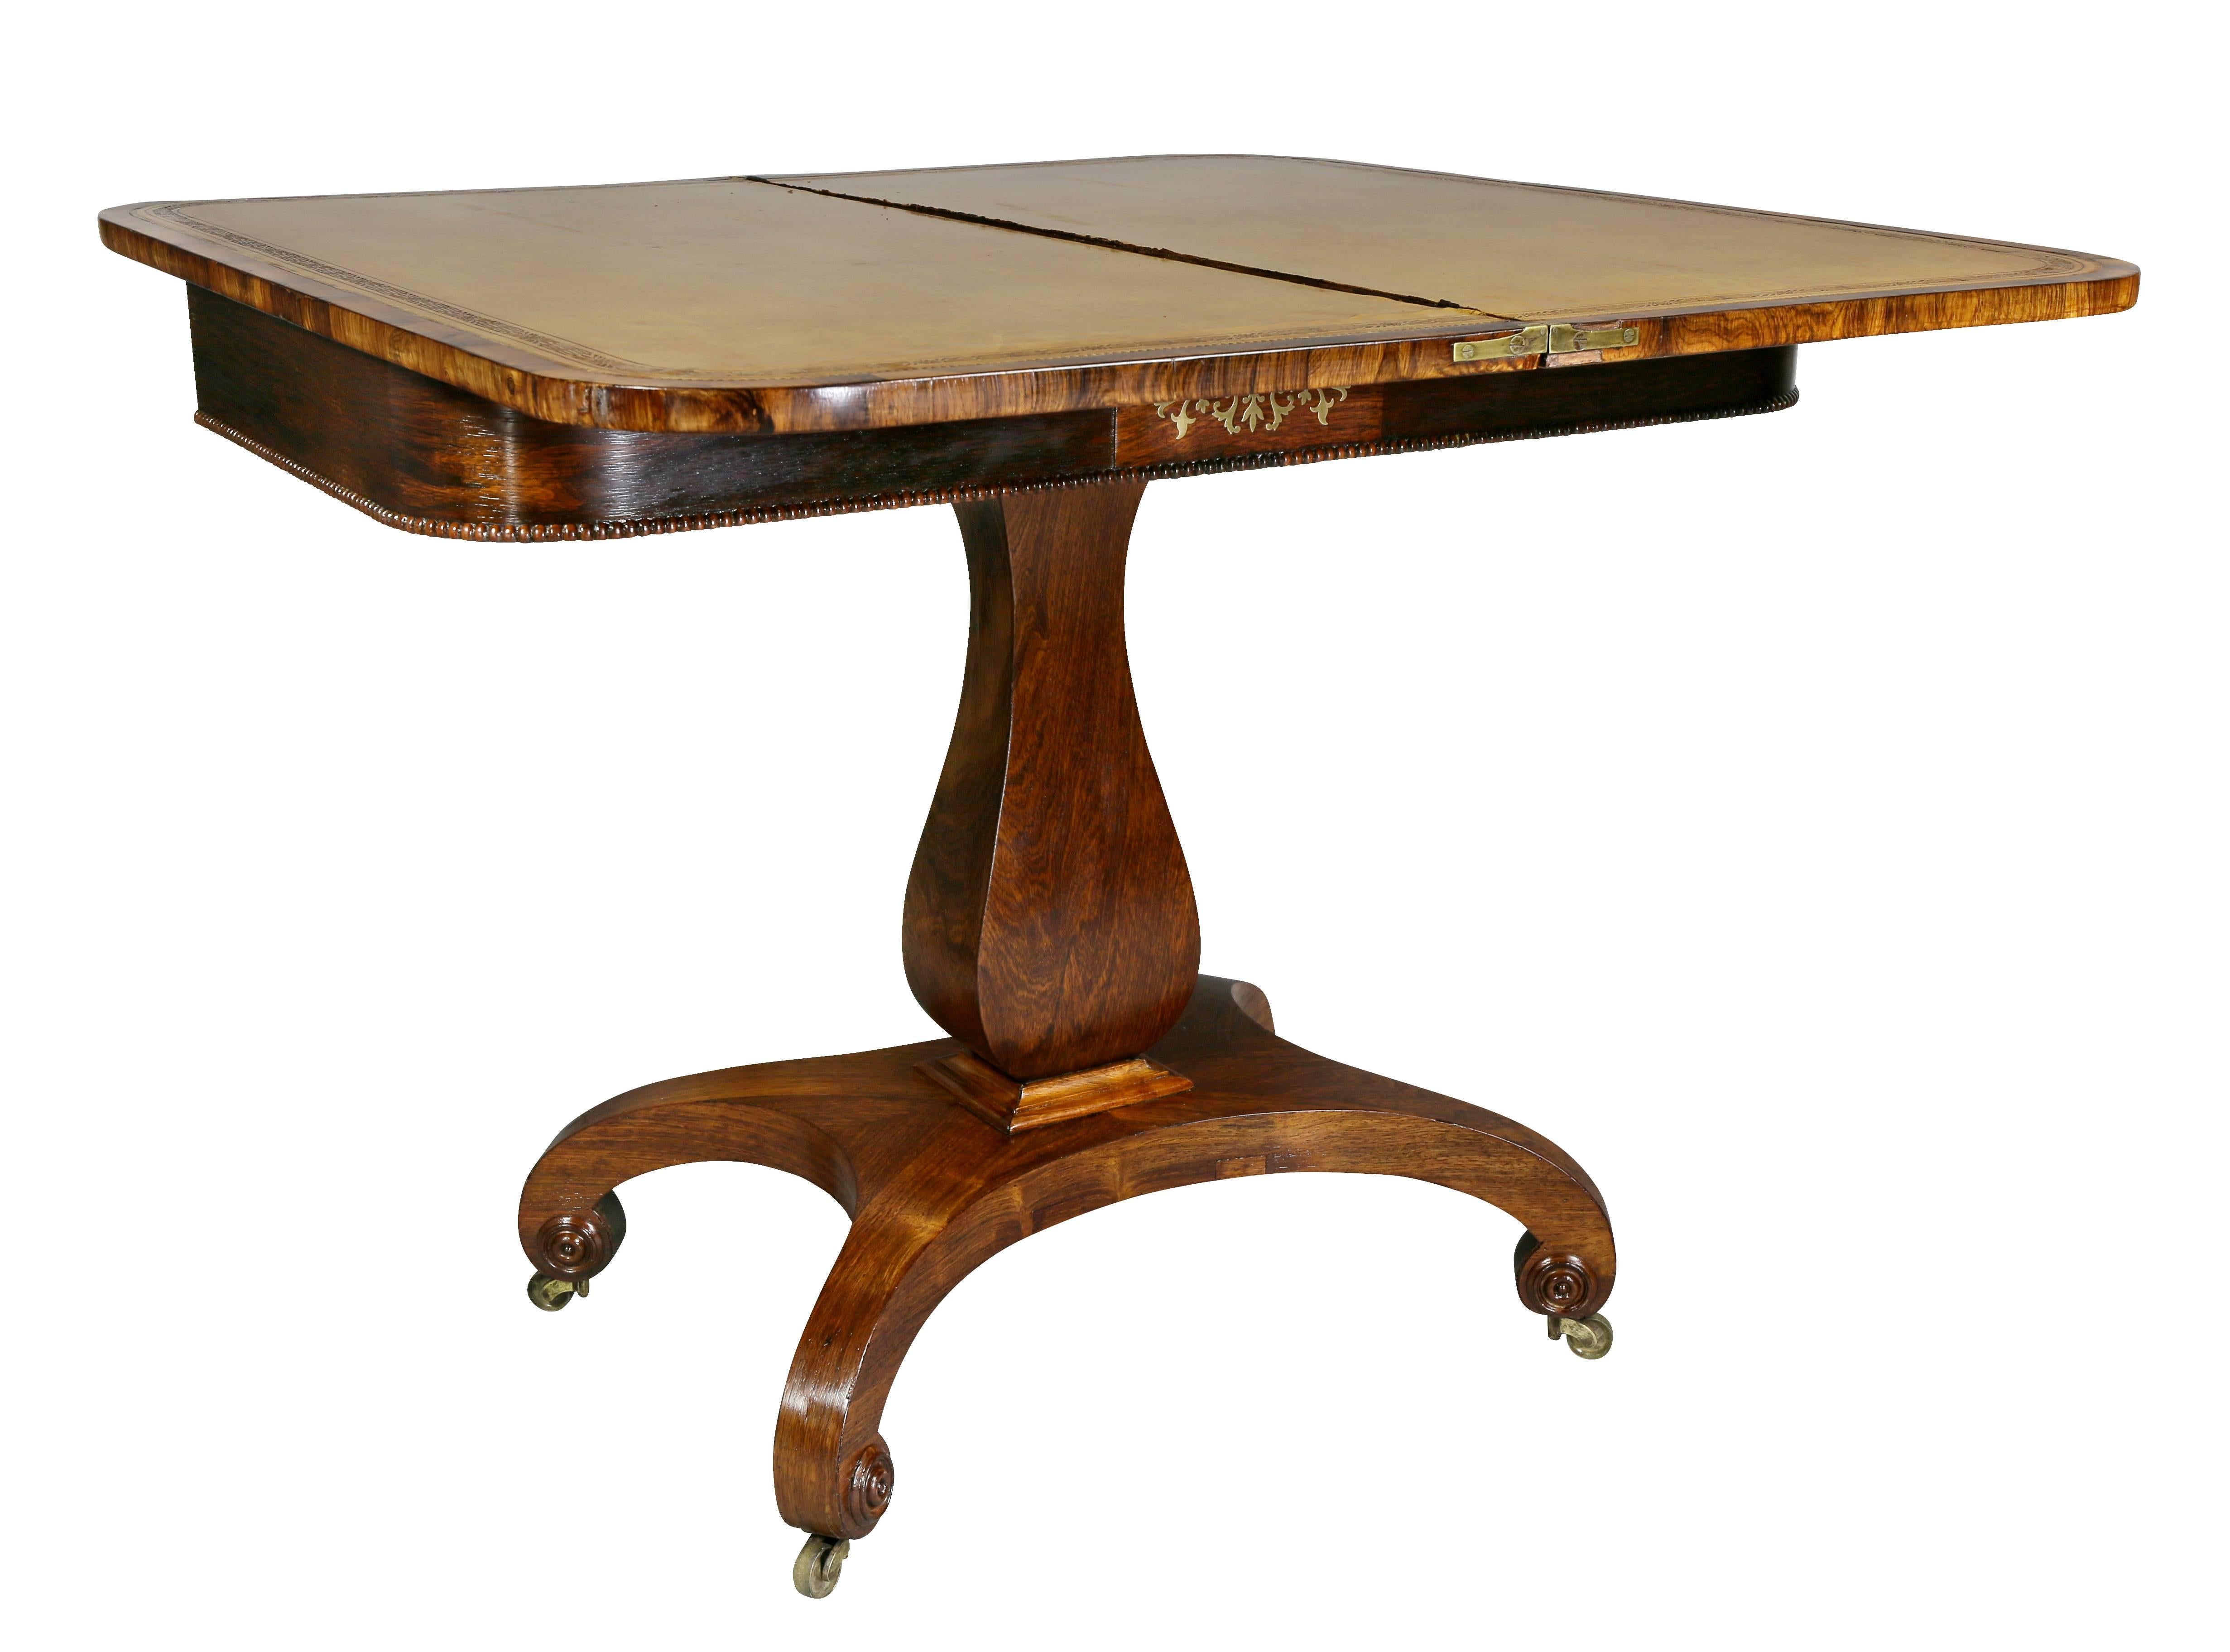 19th Century Pair of Late Regency Rosewood and Brass Inlaid Games Tables